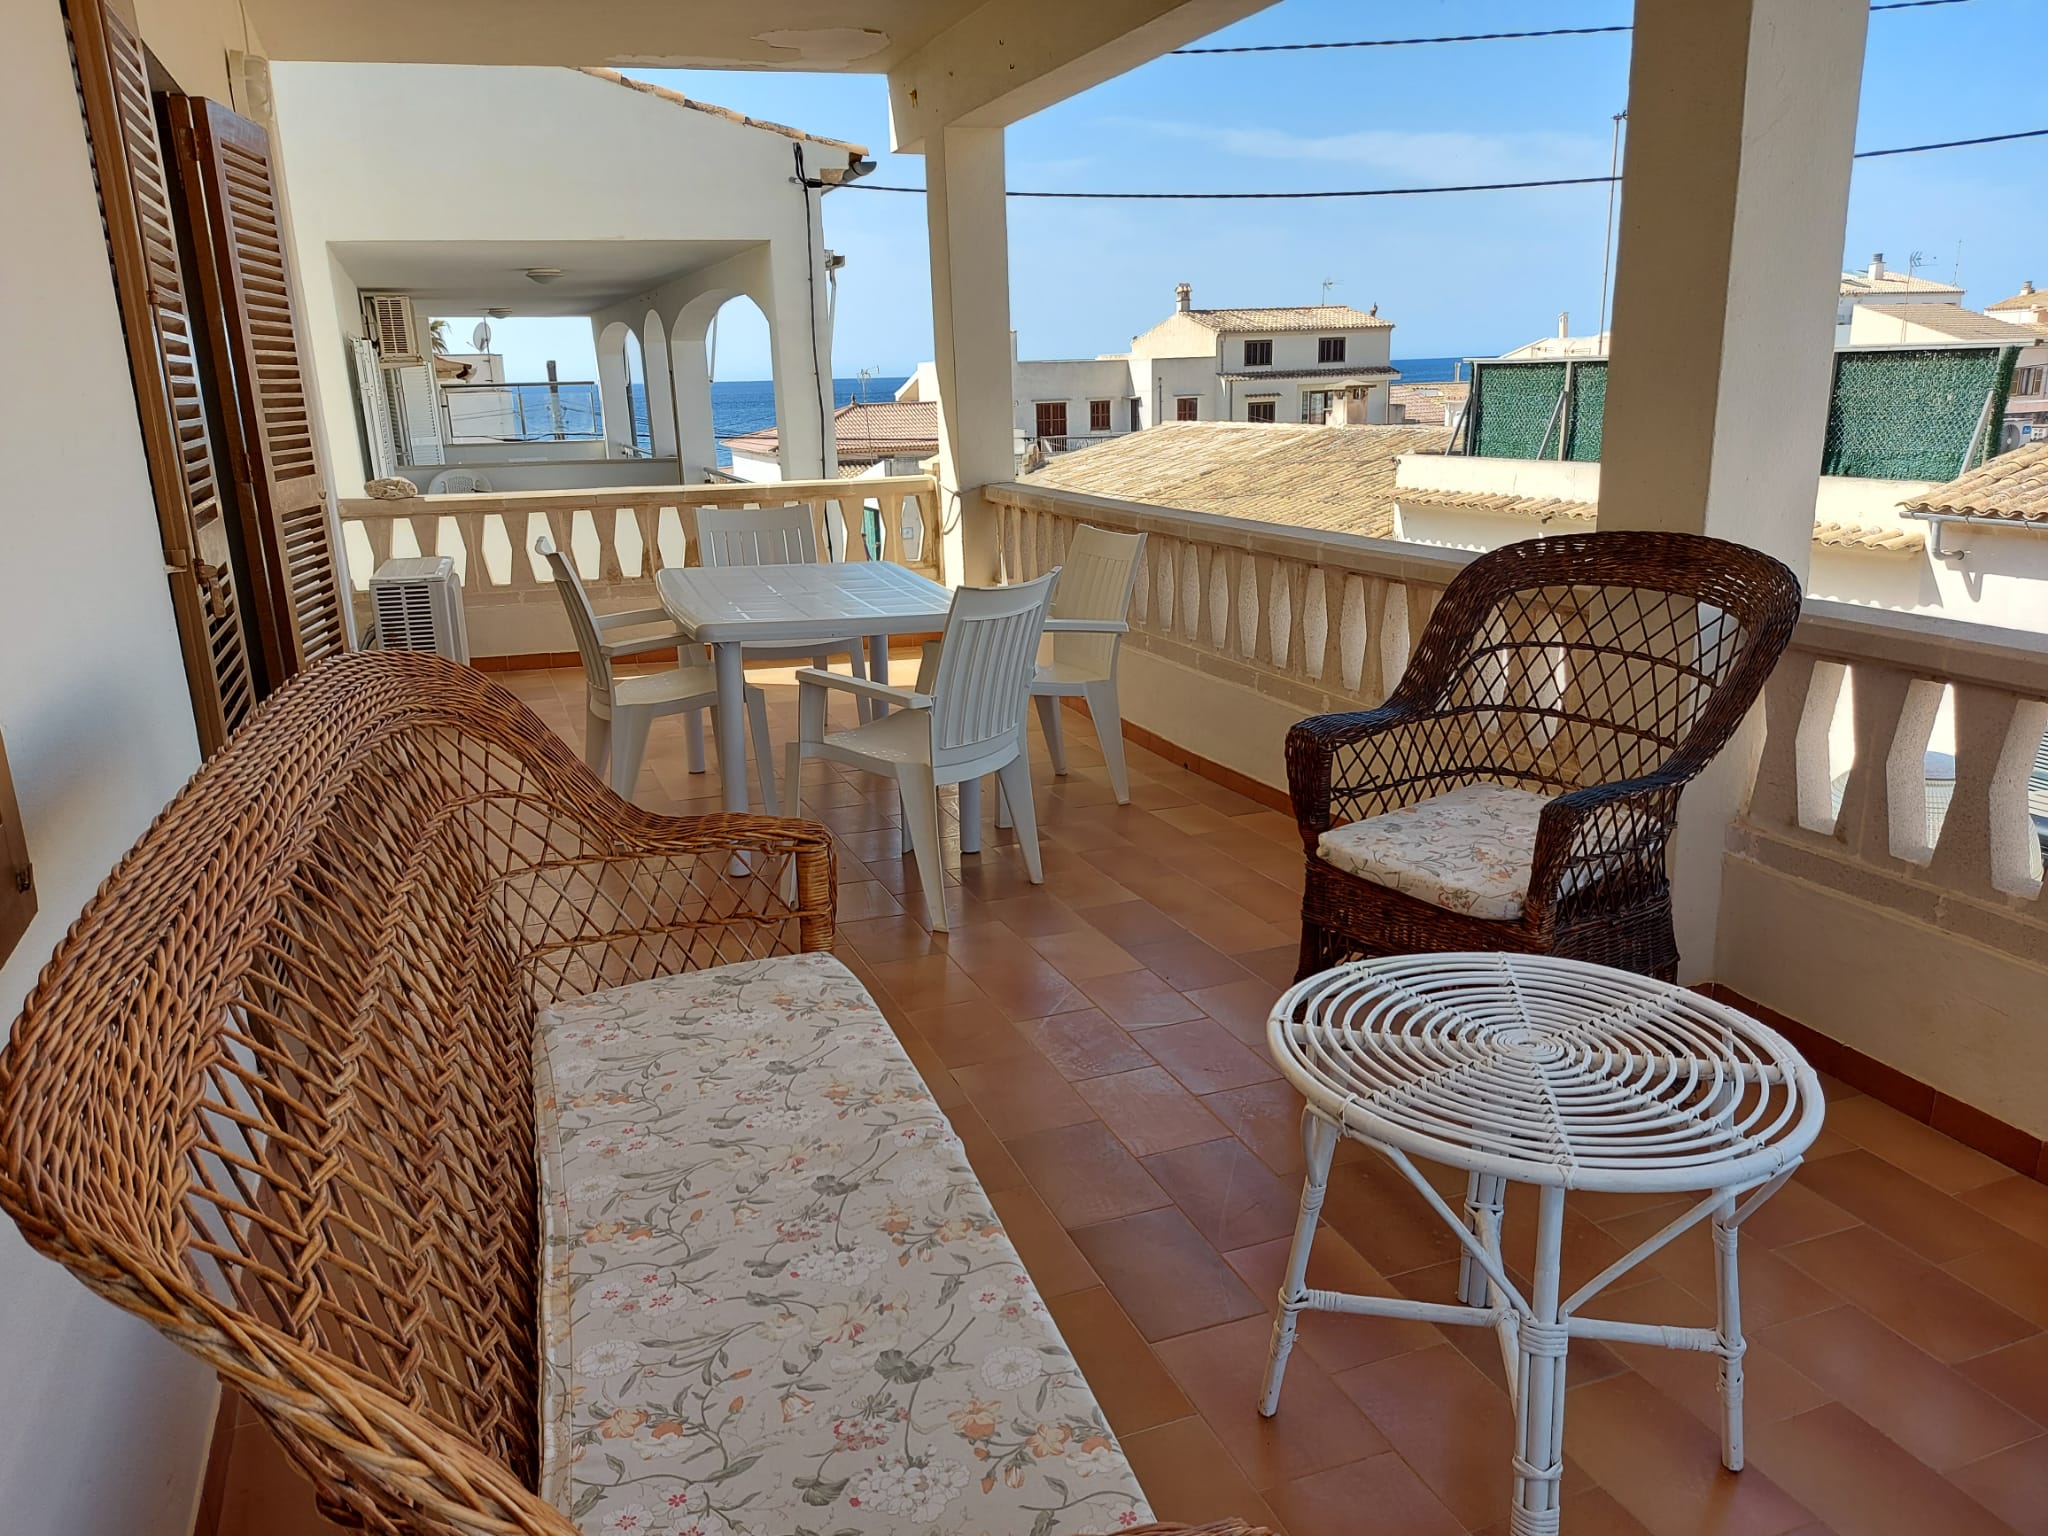 IA-303-A 3 bedroom apartment with sea views